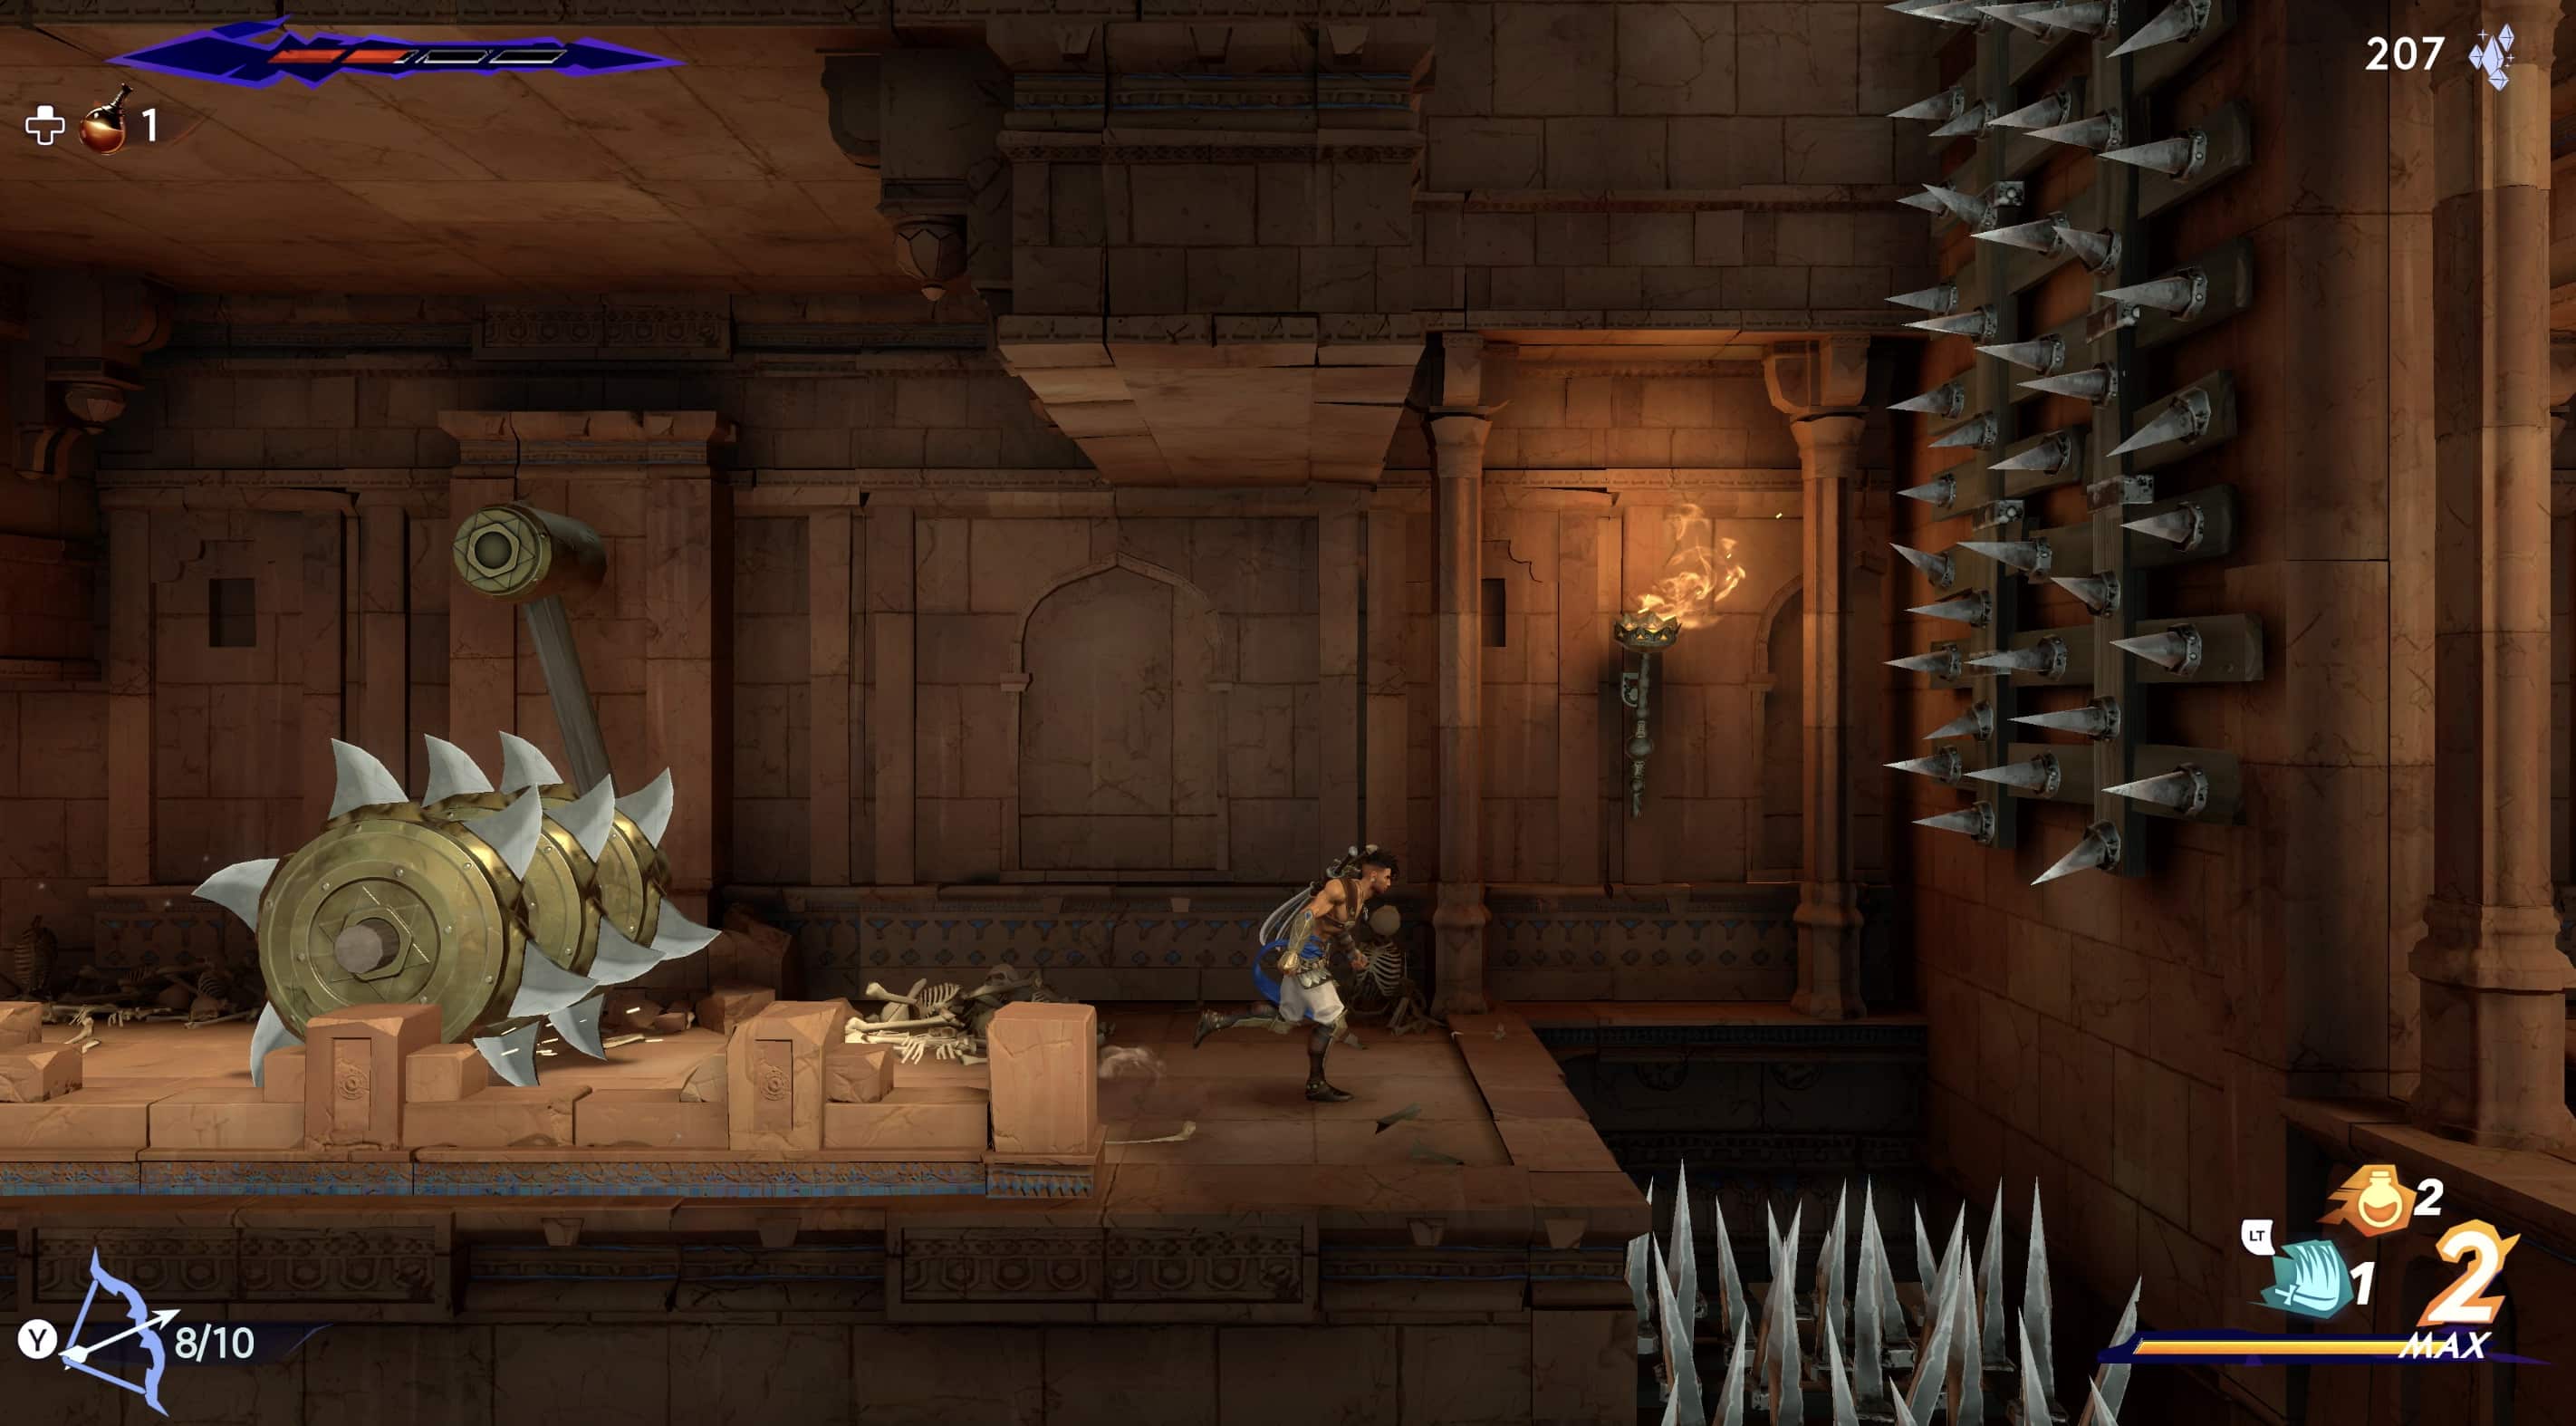 Prince of Persia: The Lost Crown Preview: A Fantastic New Take